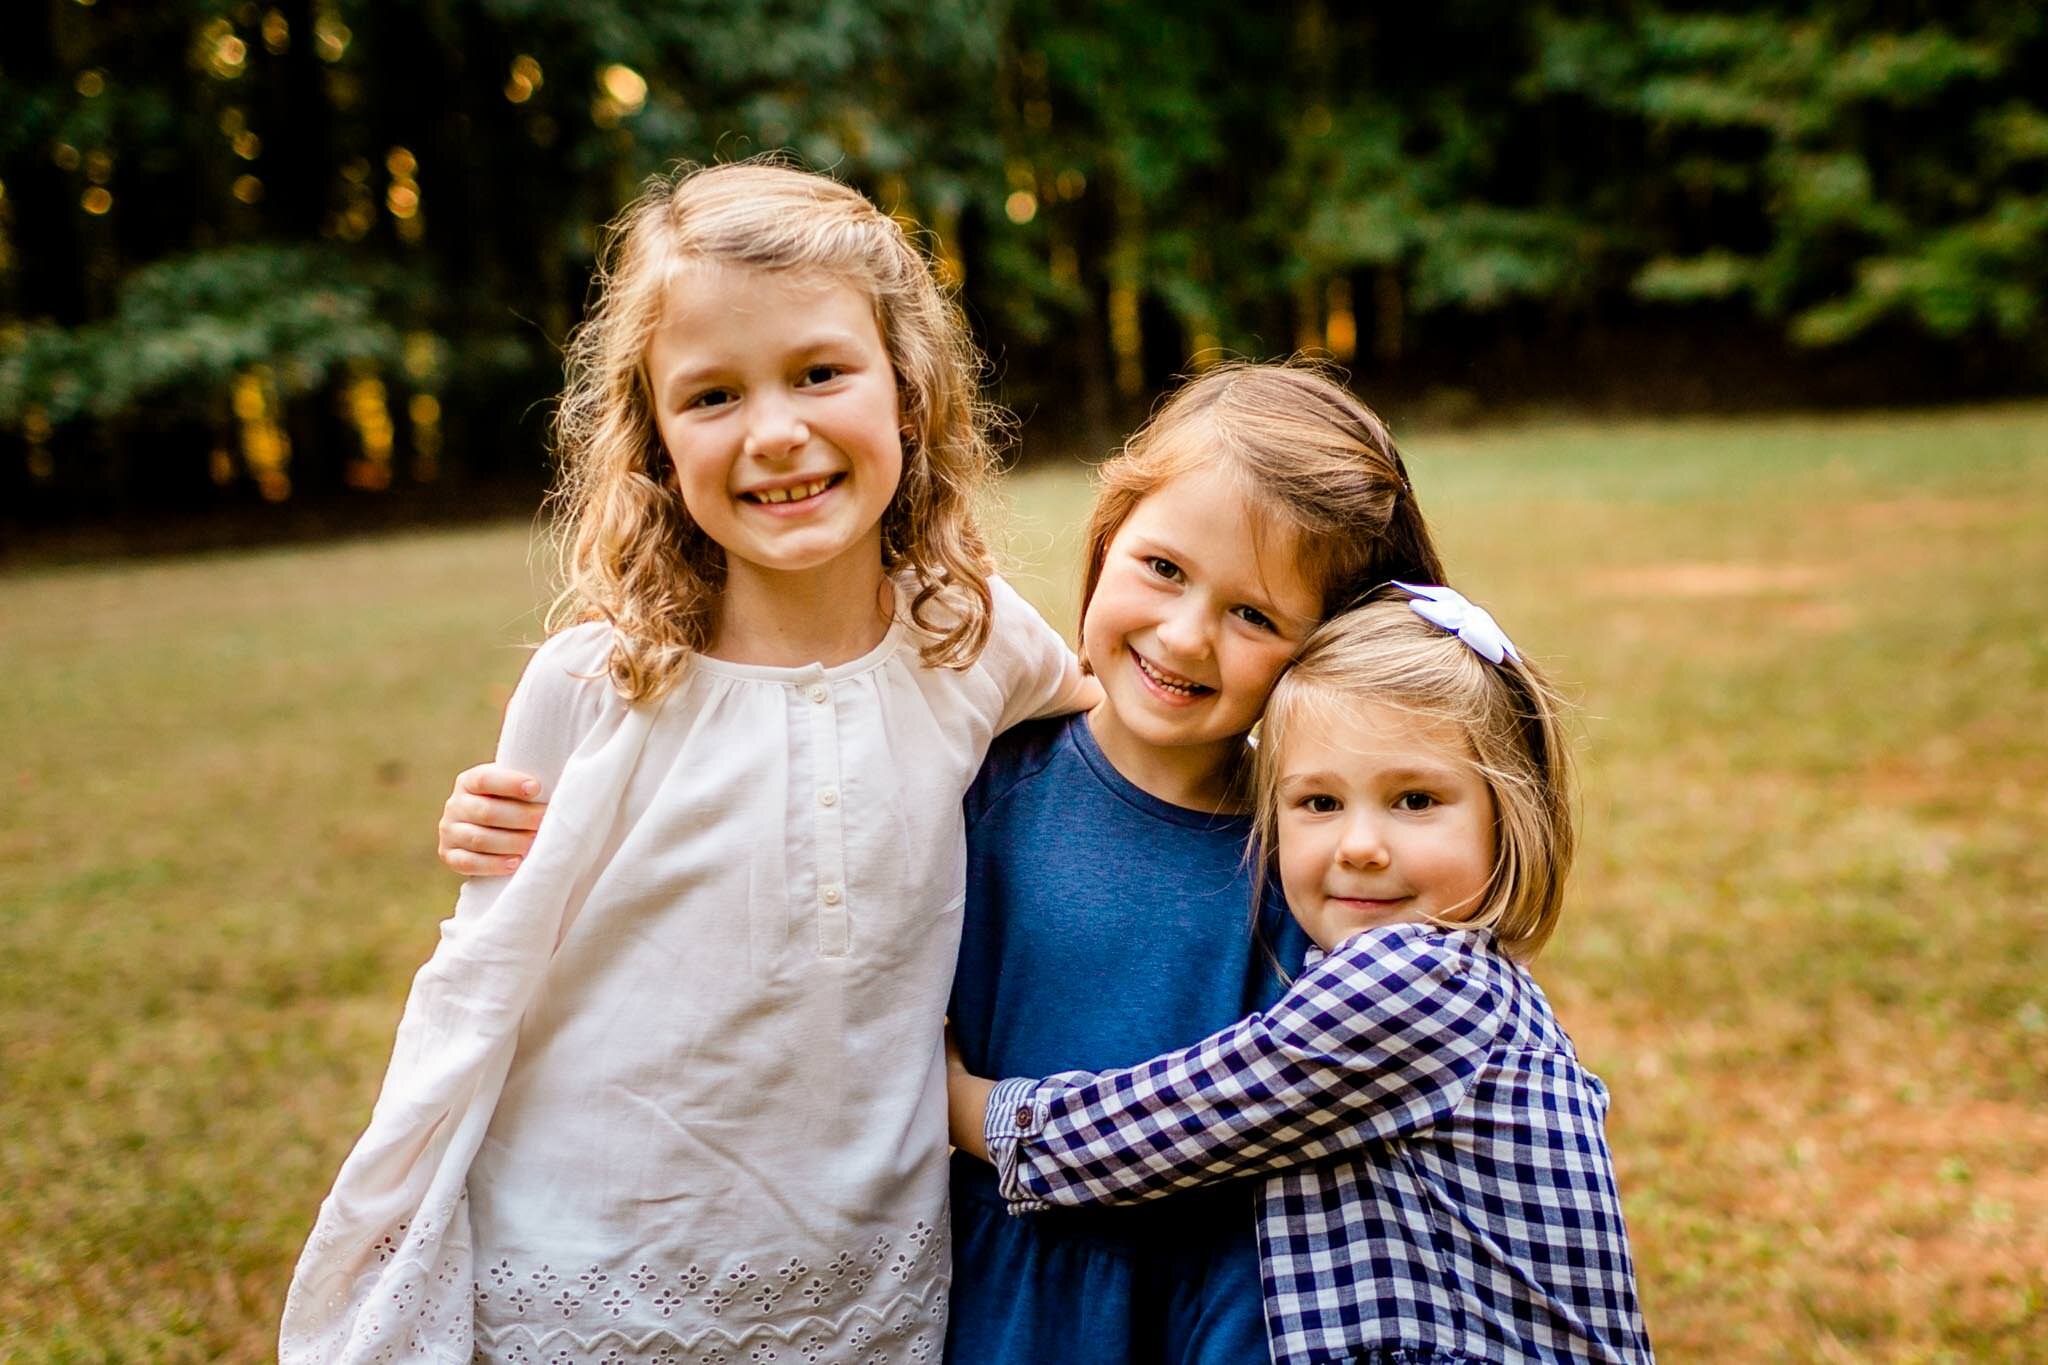 Raleigh Family Photographer | Umstead Park | By G. Lin Photography | Young girls hugging each other